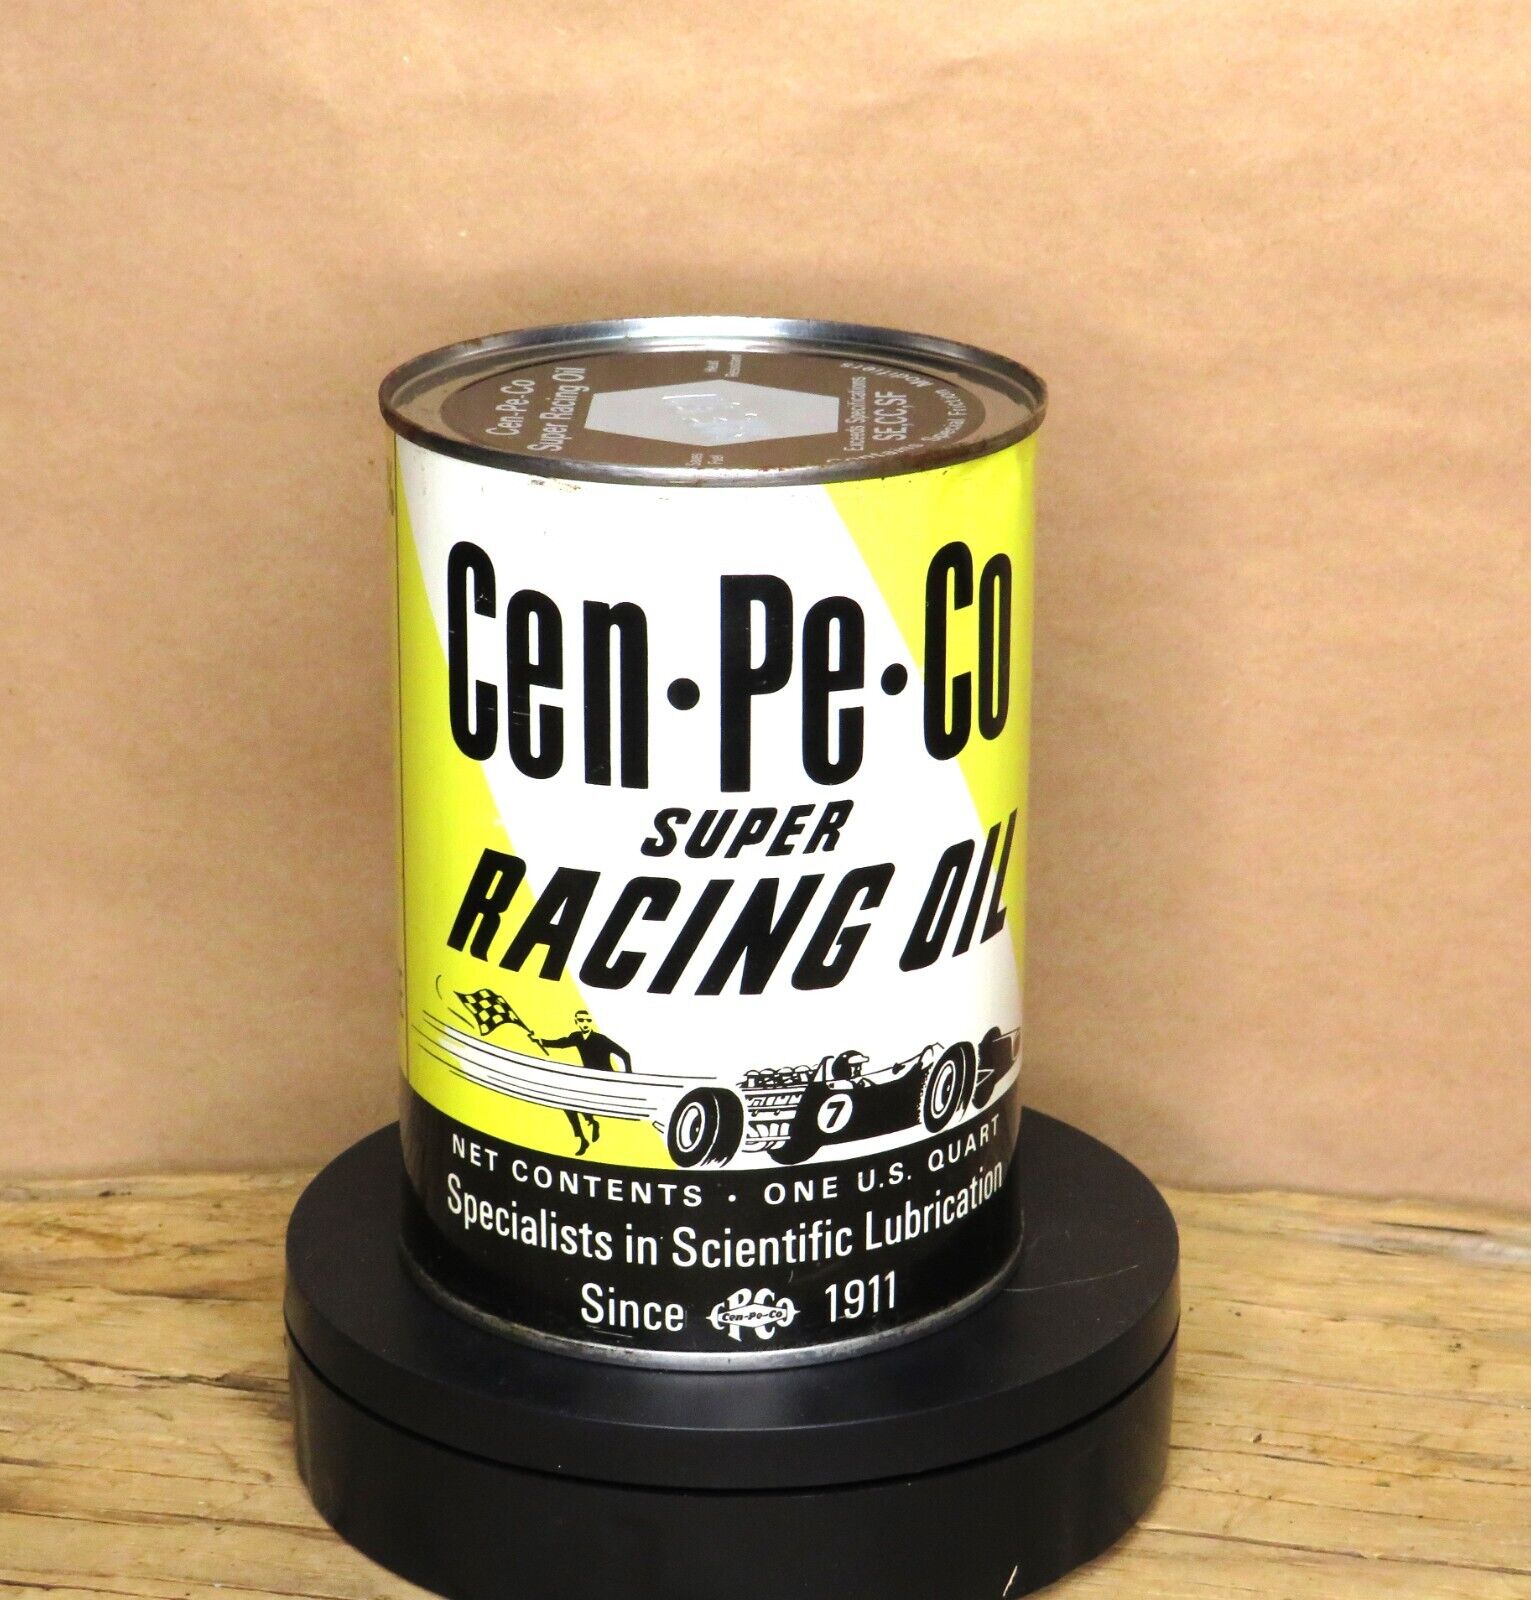 Extremely Nice NOS Full /  CEN-PE-CO SUPER RACING OIL~  Metal Quart Can